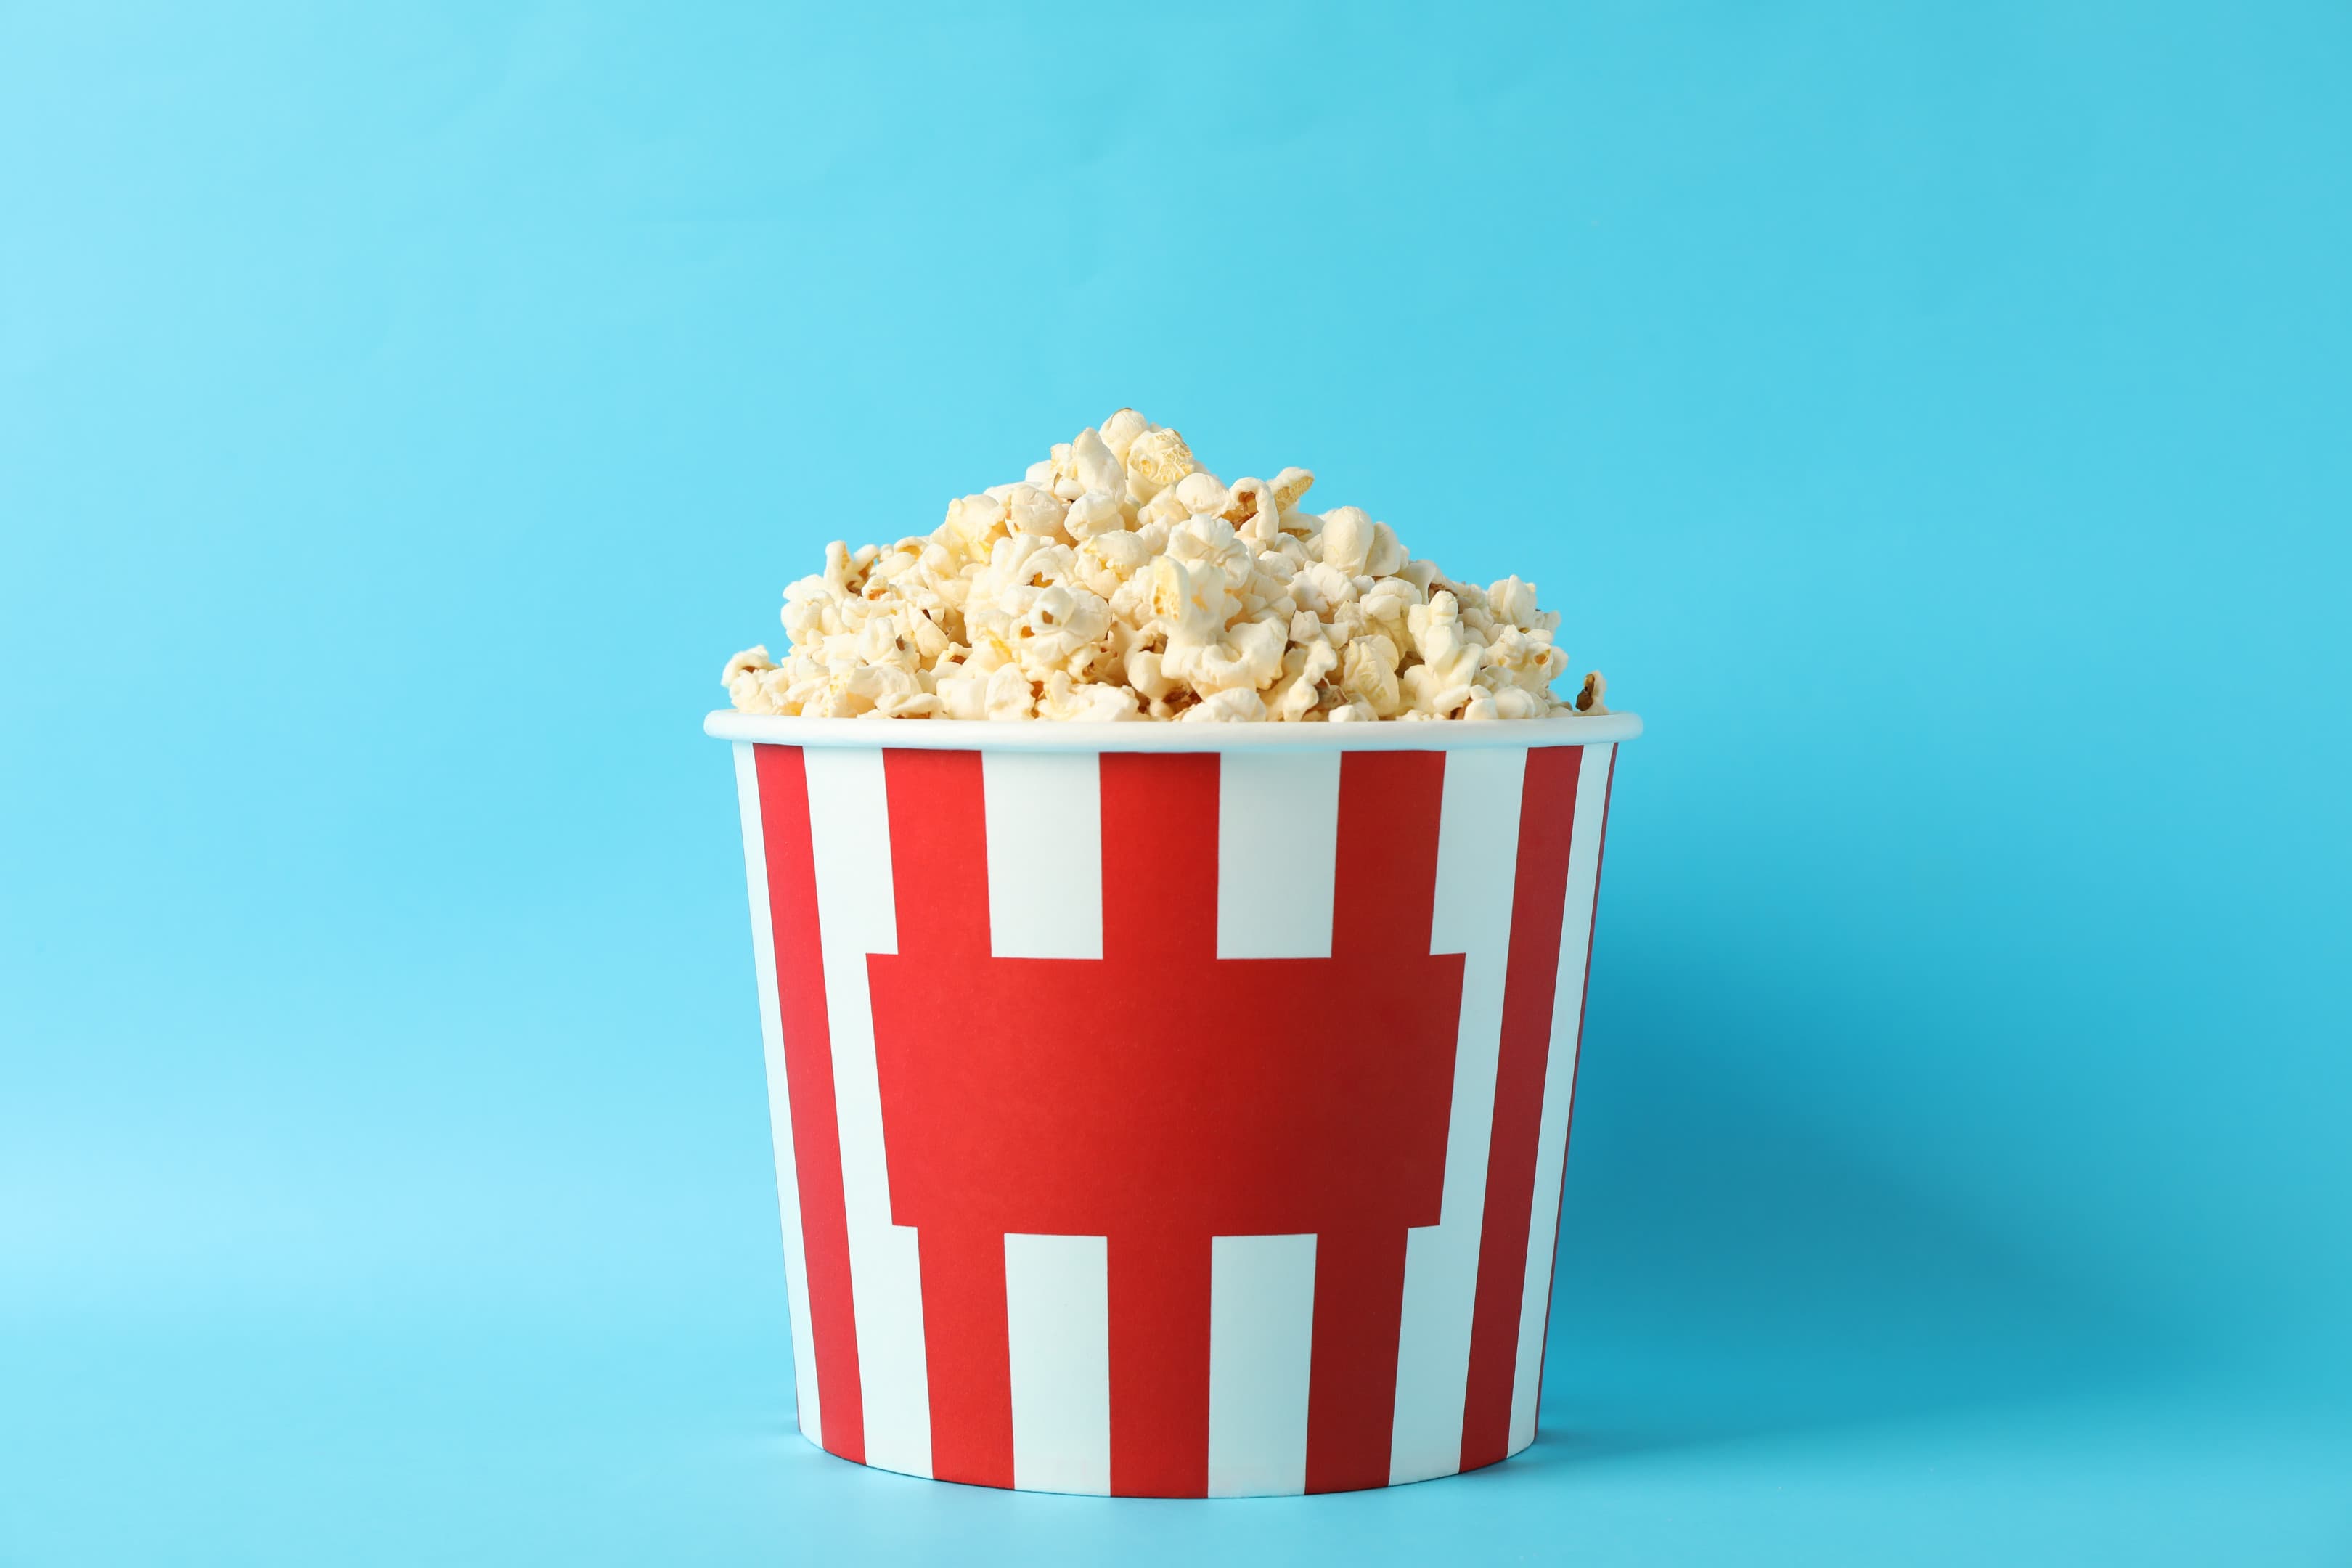 Striped bucket with popcorn on blue background